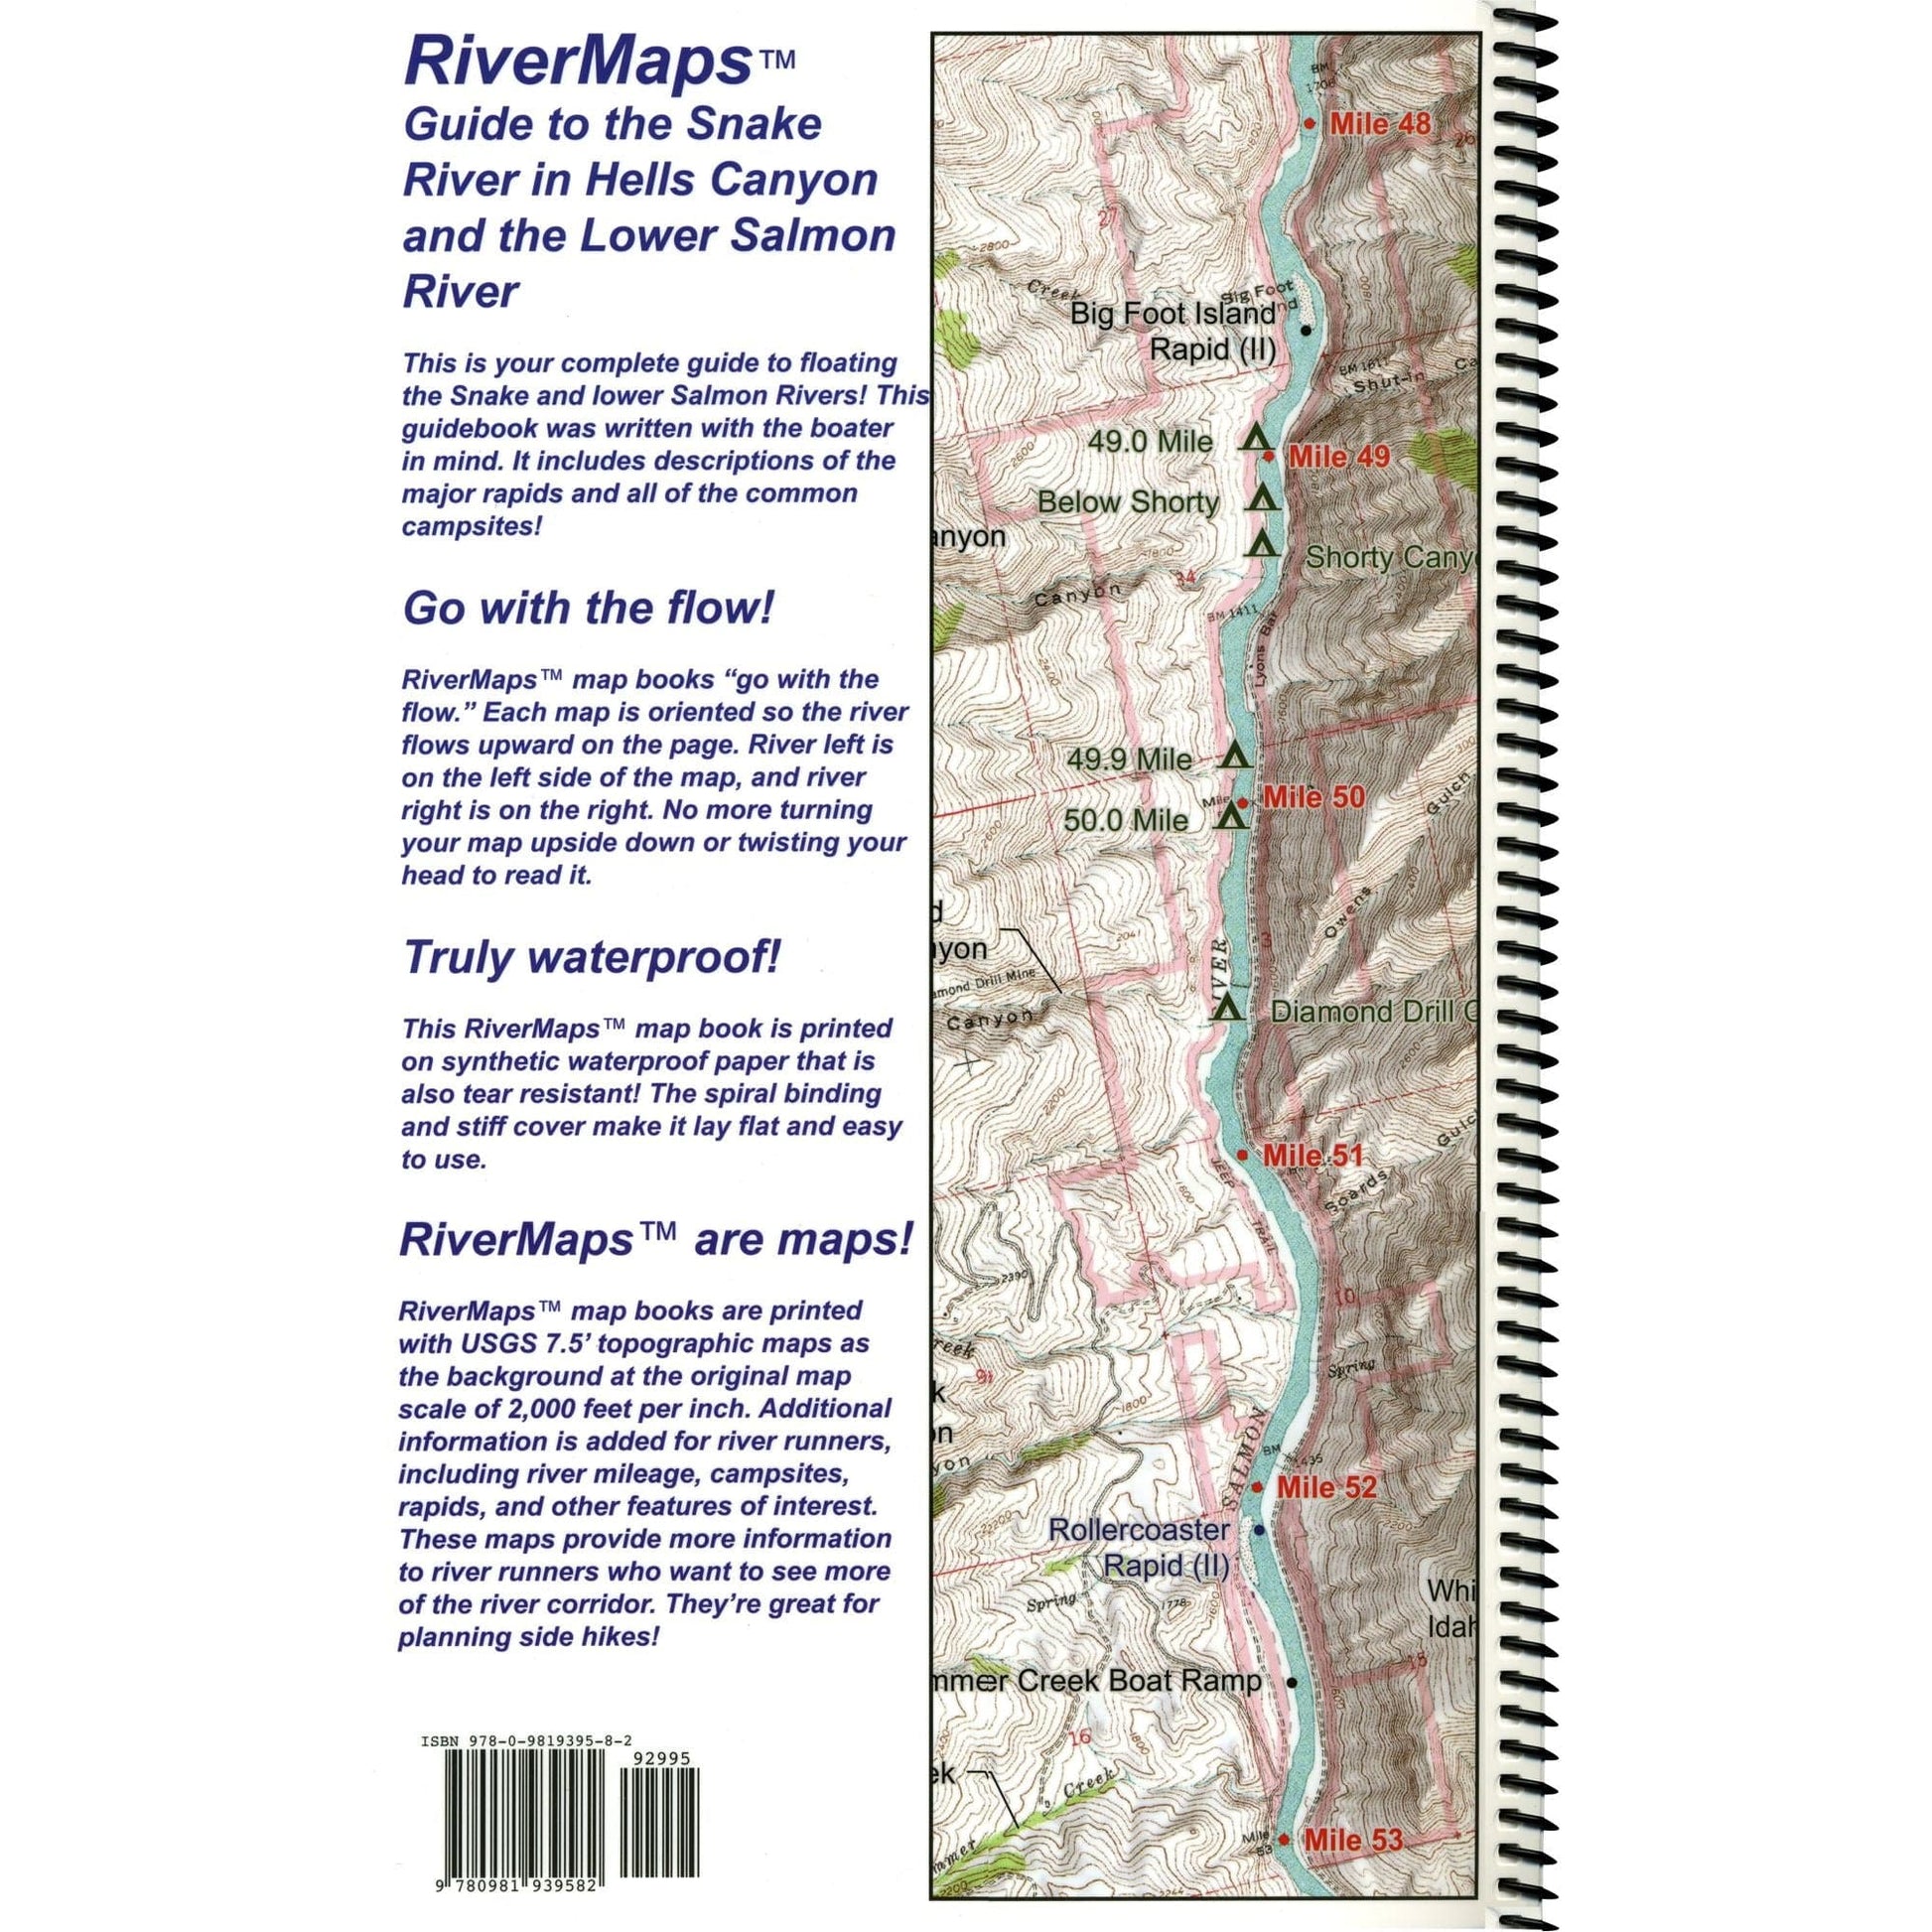 Featuring the Snake & Lower Salmon River Guide Book guide book manufactured by Rivermaps shown here from a second angle.